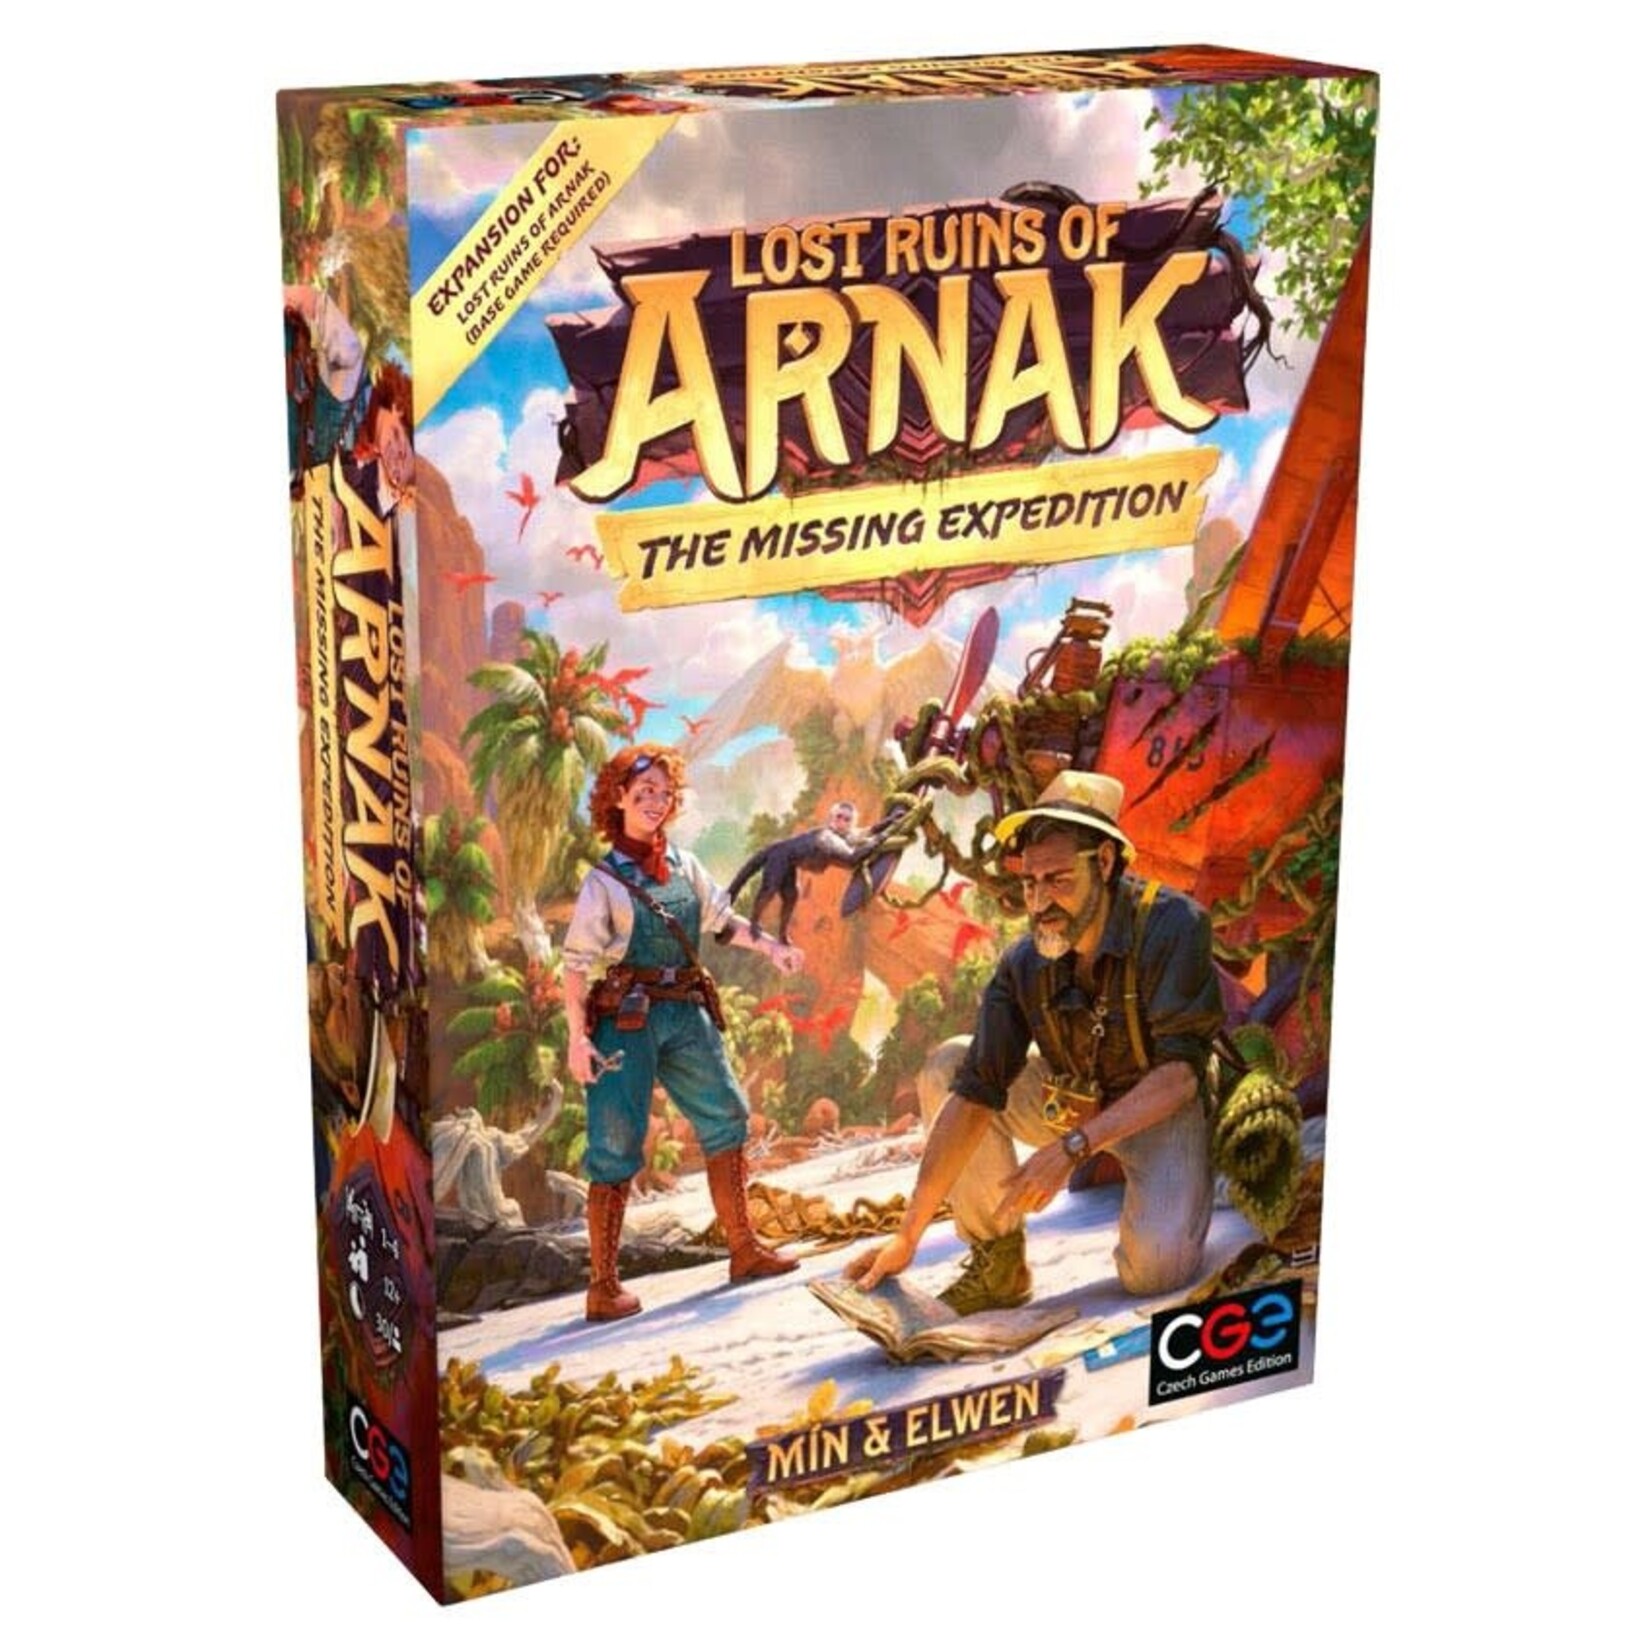 Czech Games Edition, Inc. Lost Ruins of Arnak: The Missing Expedition Expansion